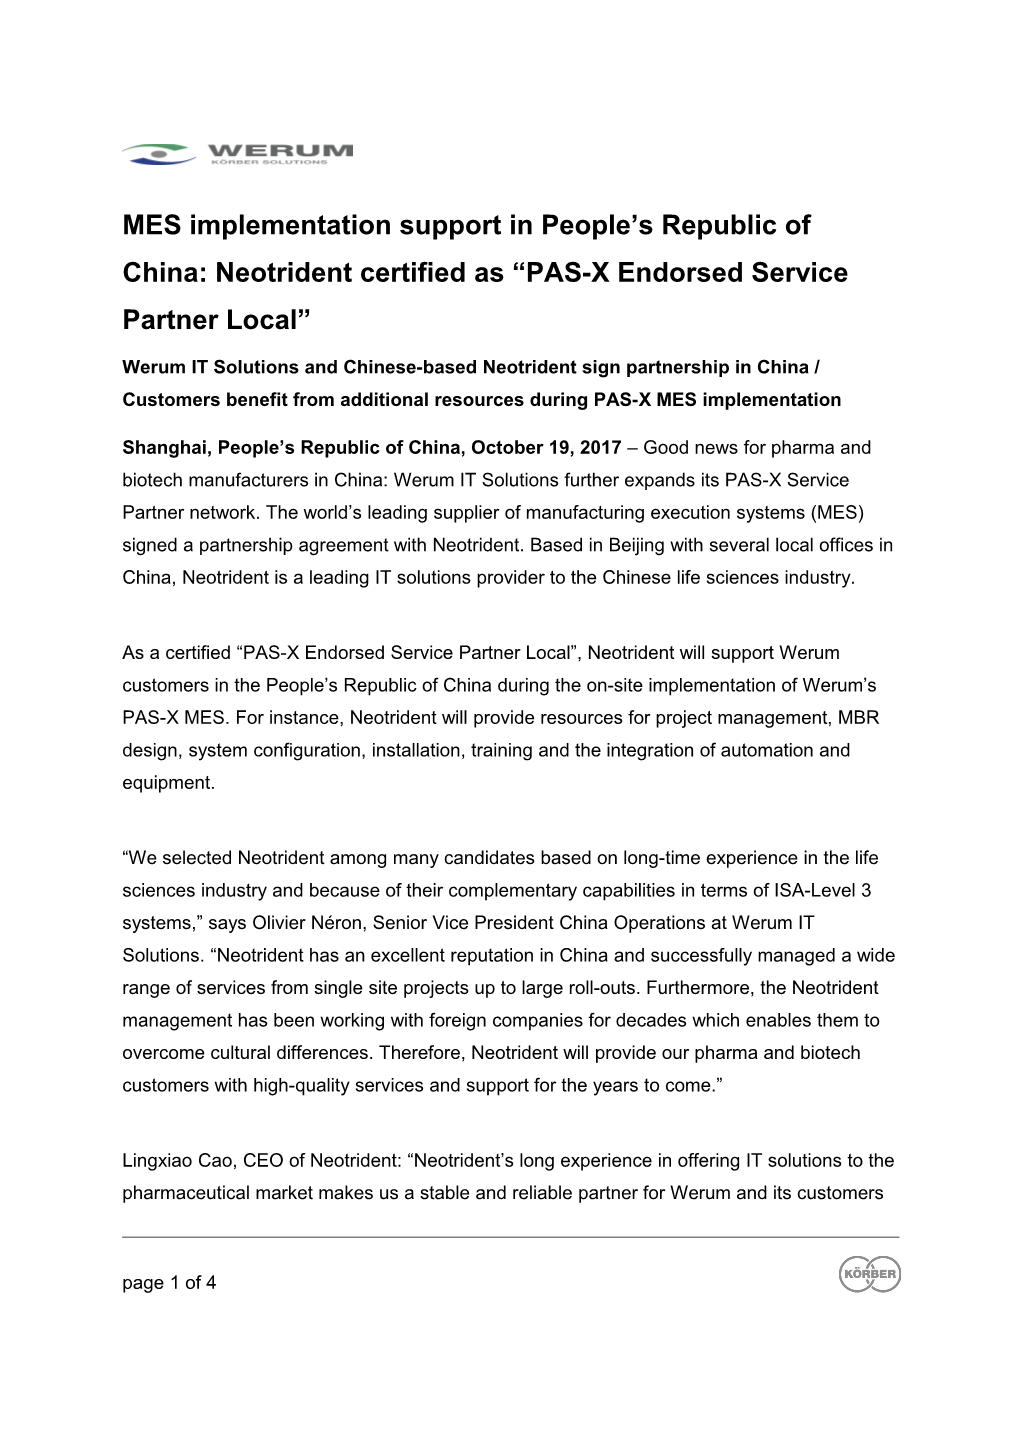 MES Implementation Support in People S Republic of China: Neotrident Certified As PAS-X